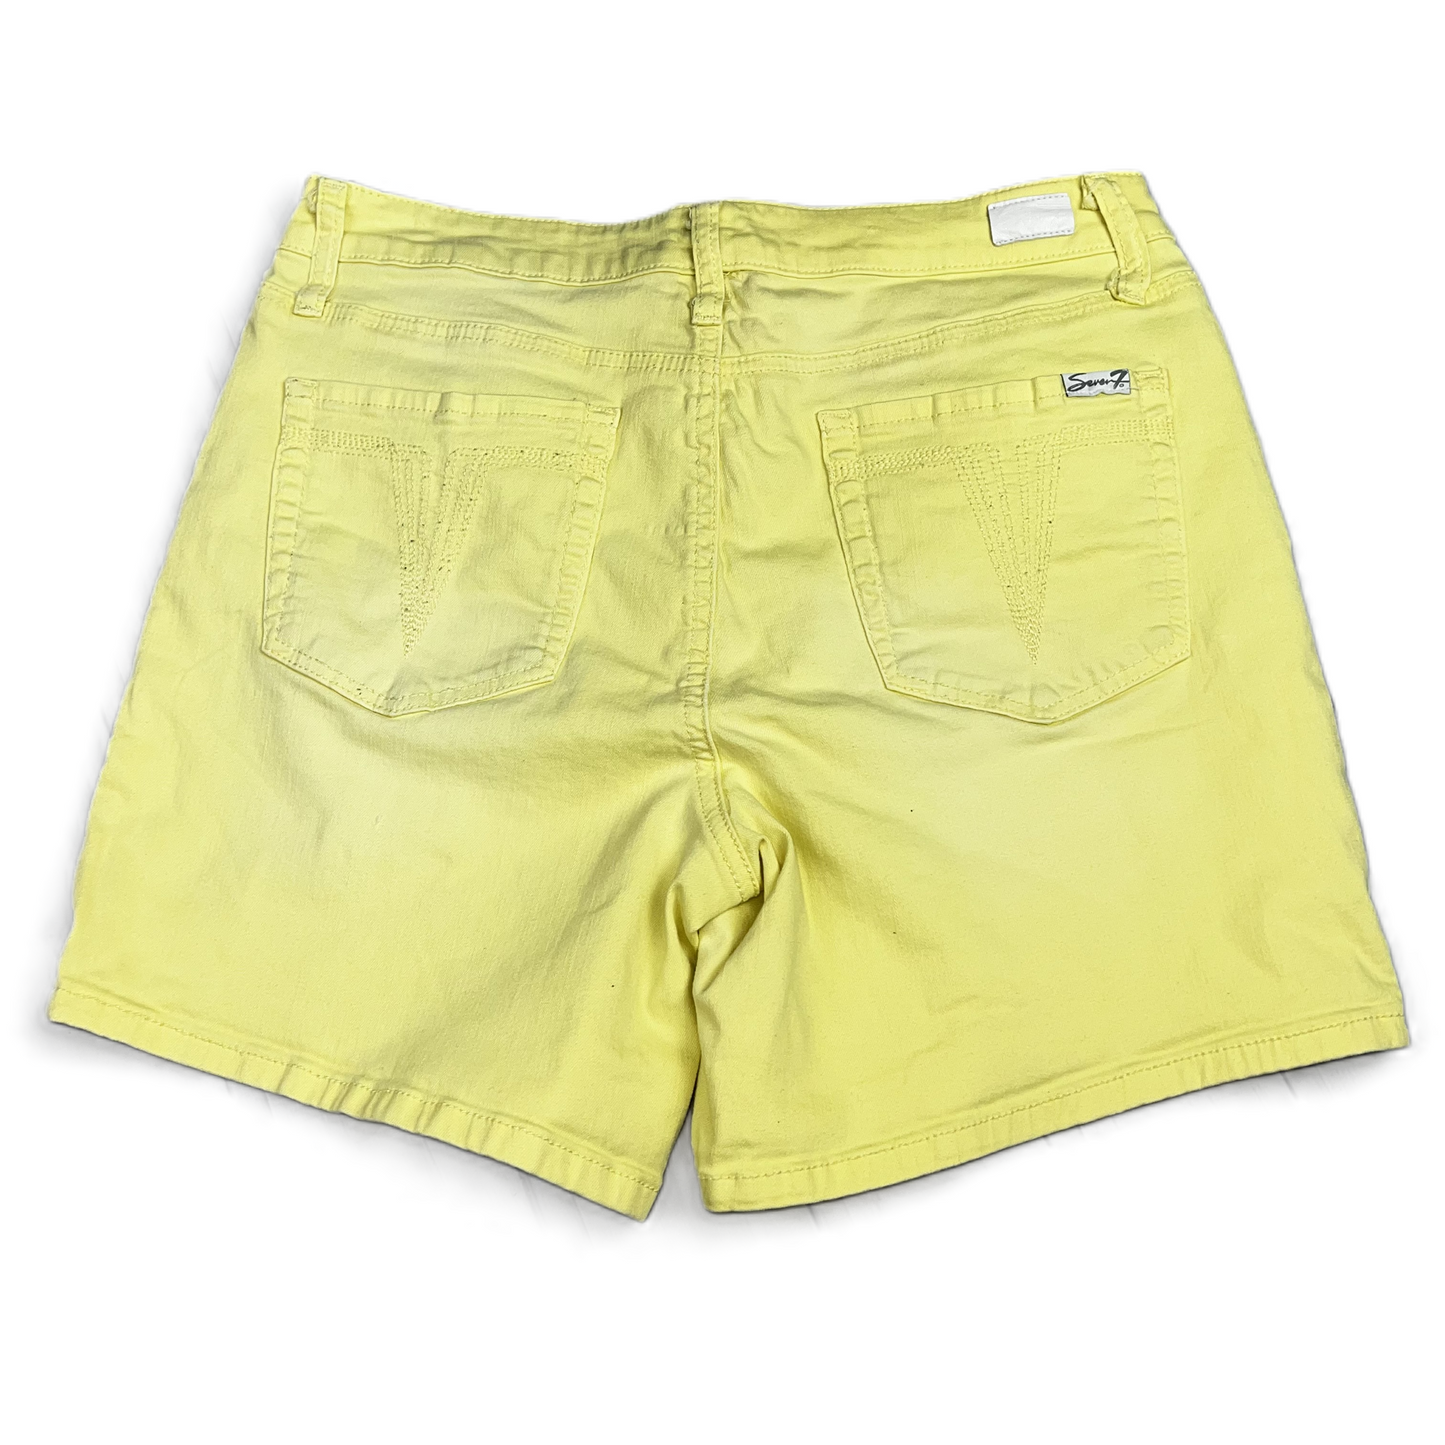 Yellow Denim Shorts By Seven 7, Size: 10